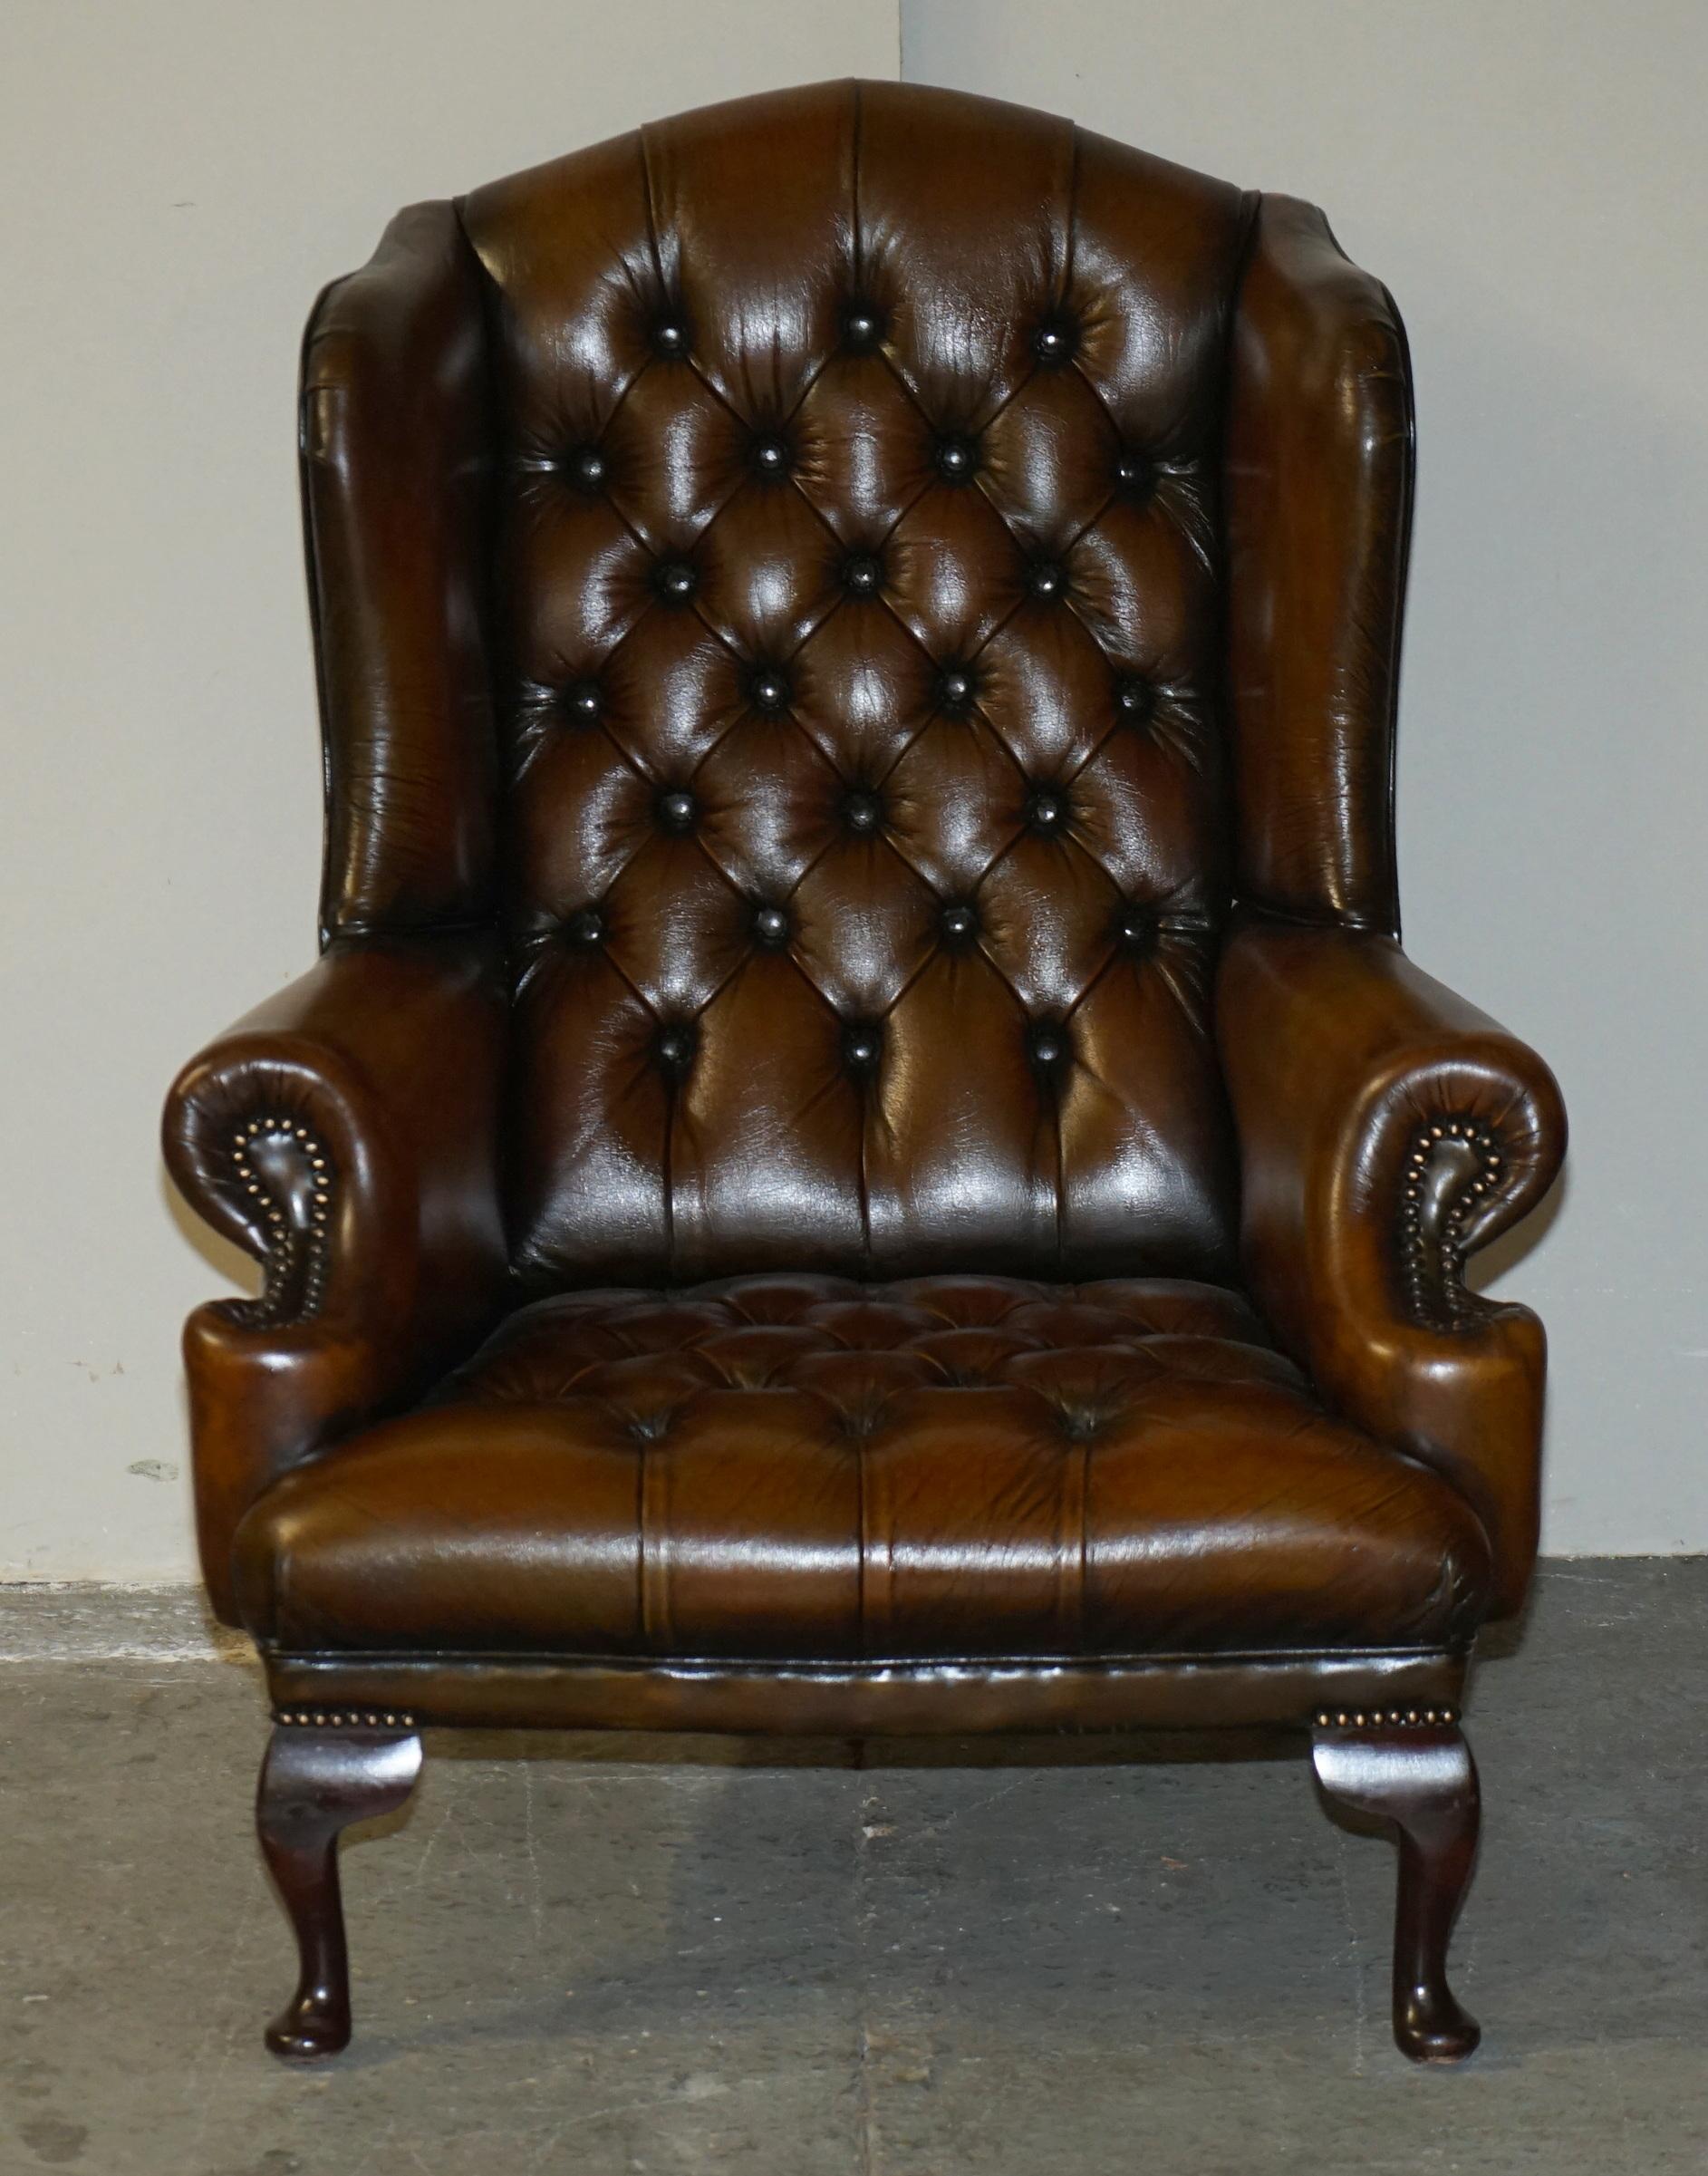 Chesterfield RESTORED PAIR OF WiLLIAM MORRIS BROWN LEATHER CHESTERFIELD WINGBACK ARMCHAIRS